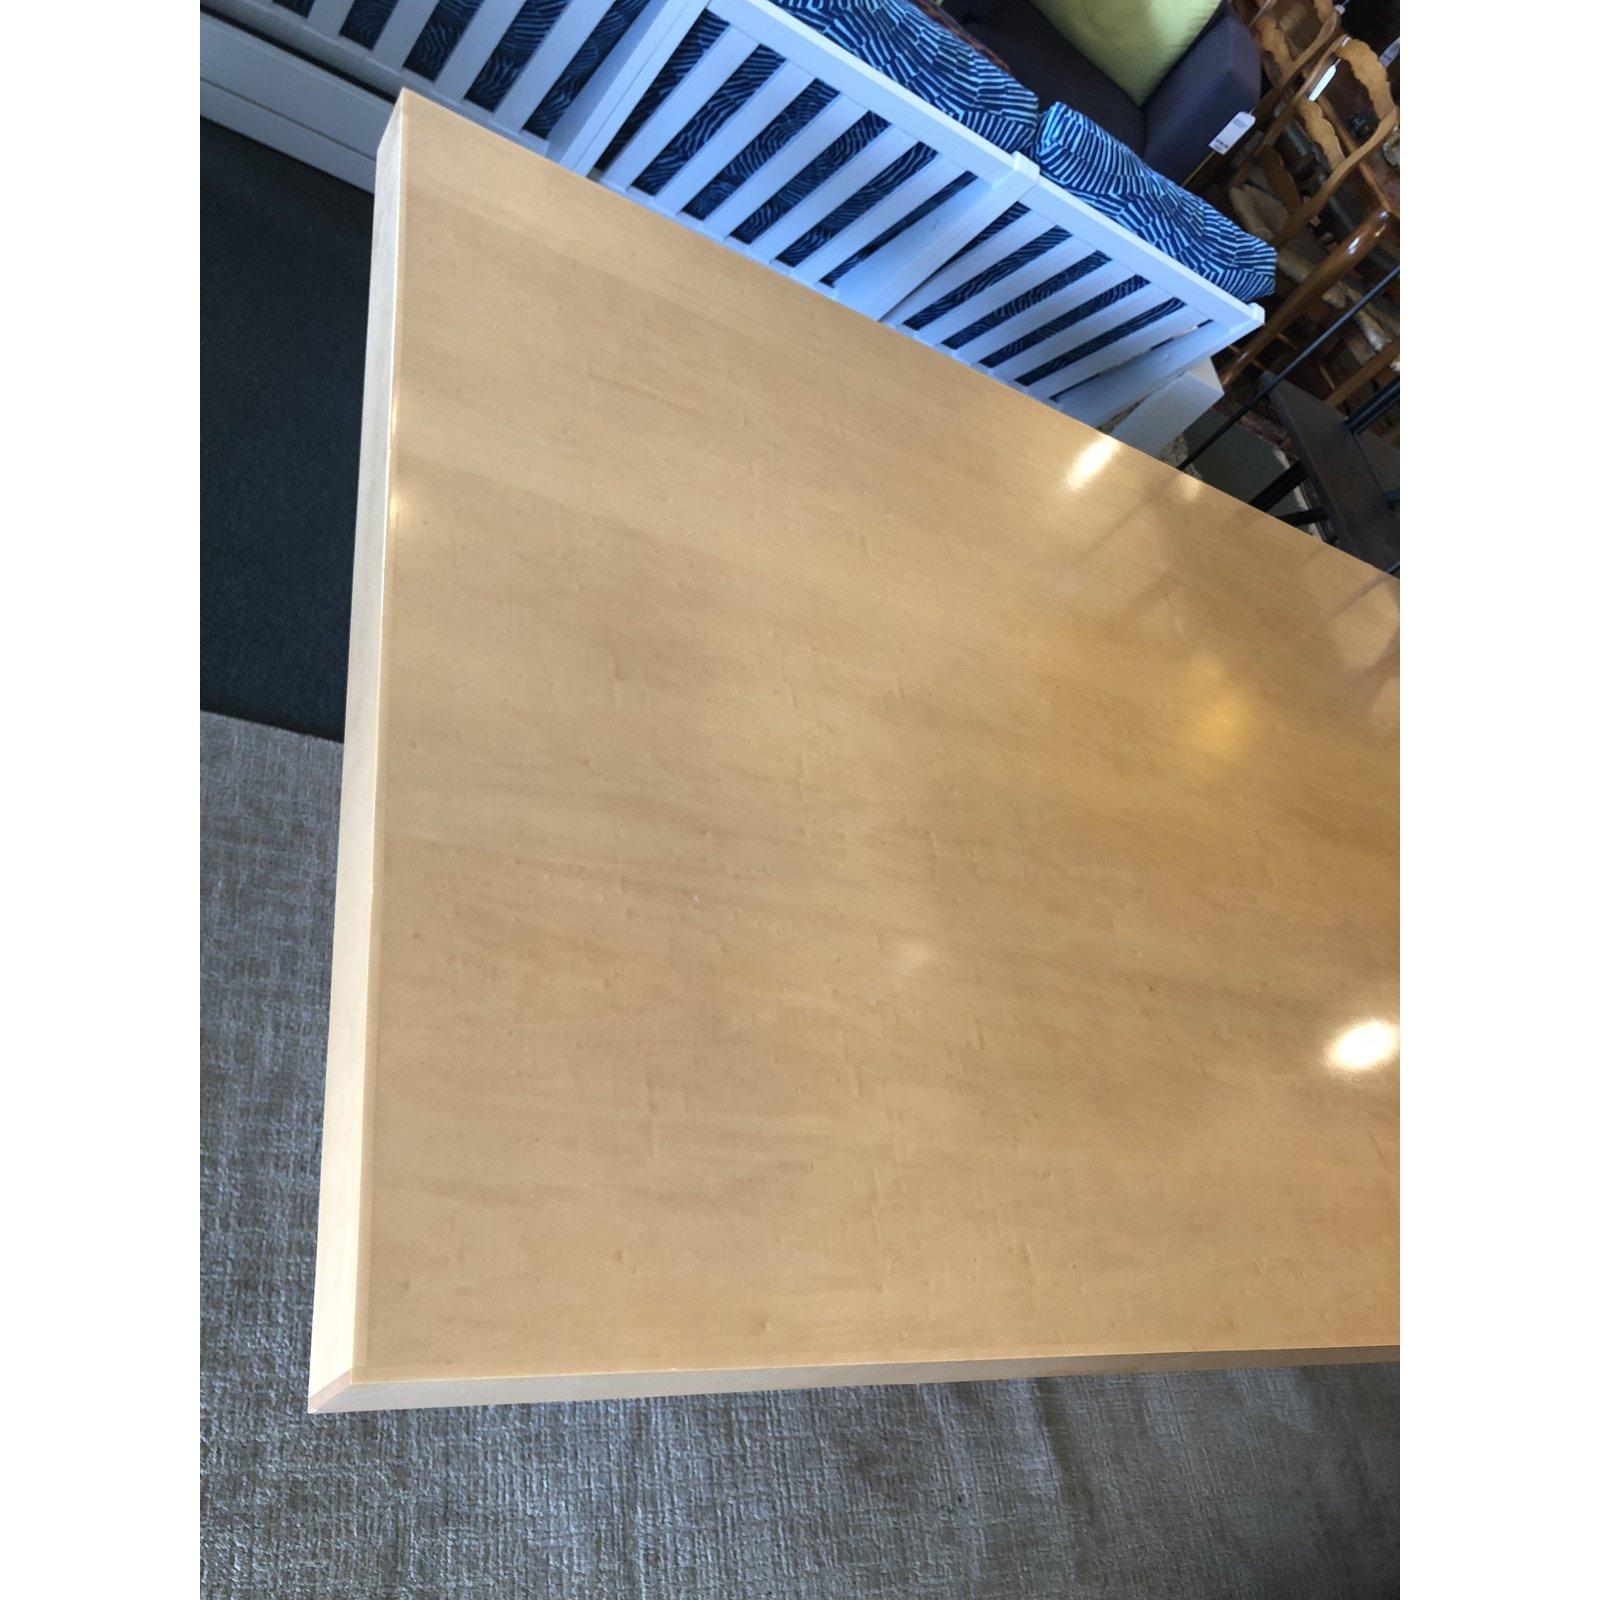 A contemporary table made through CJ Welch showroom in San Francisco Design Center. It can be used as a dining table, conference table or large desk. Original Price $15,000.

 